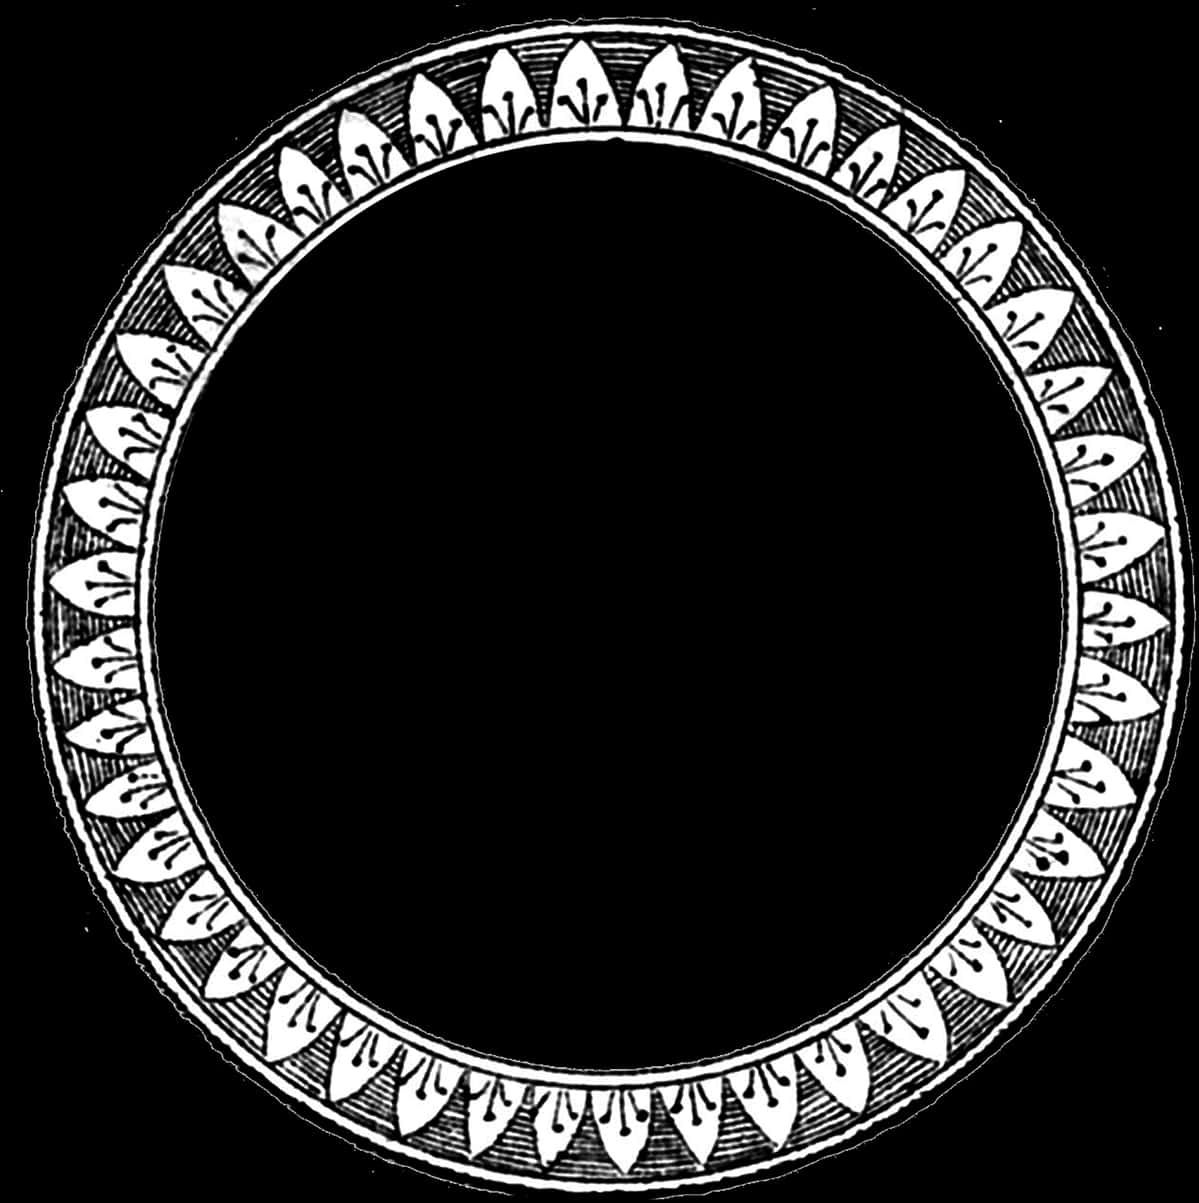 A Circular Design With Leaves